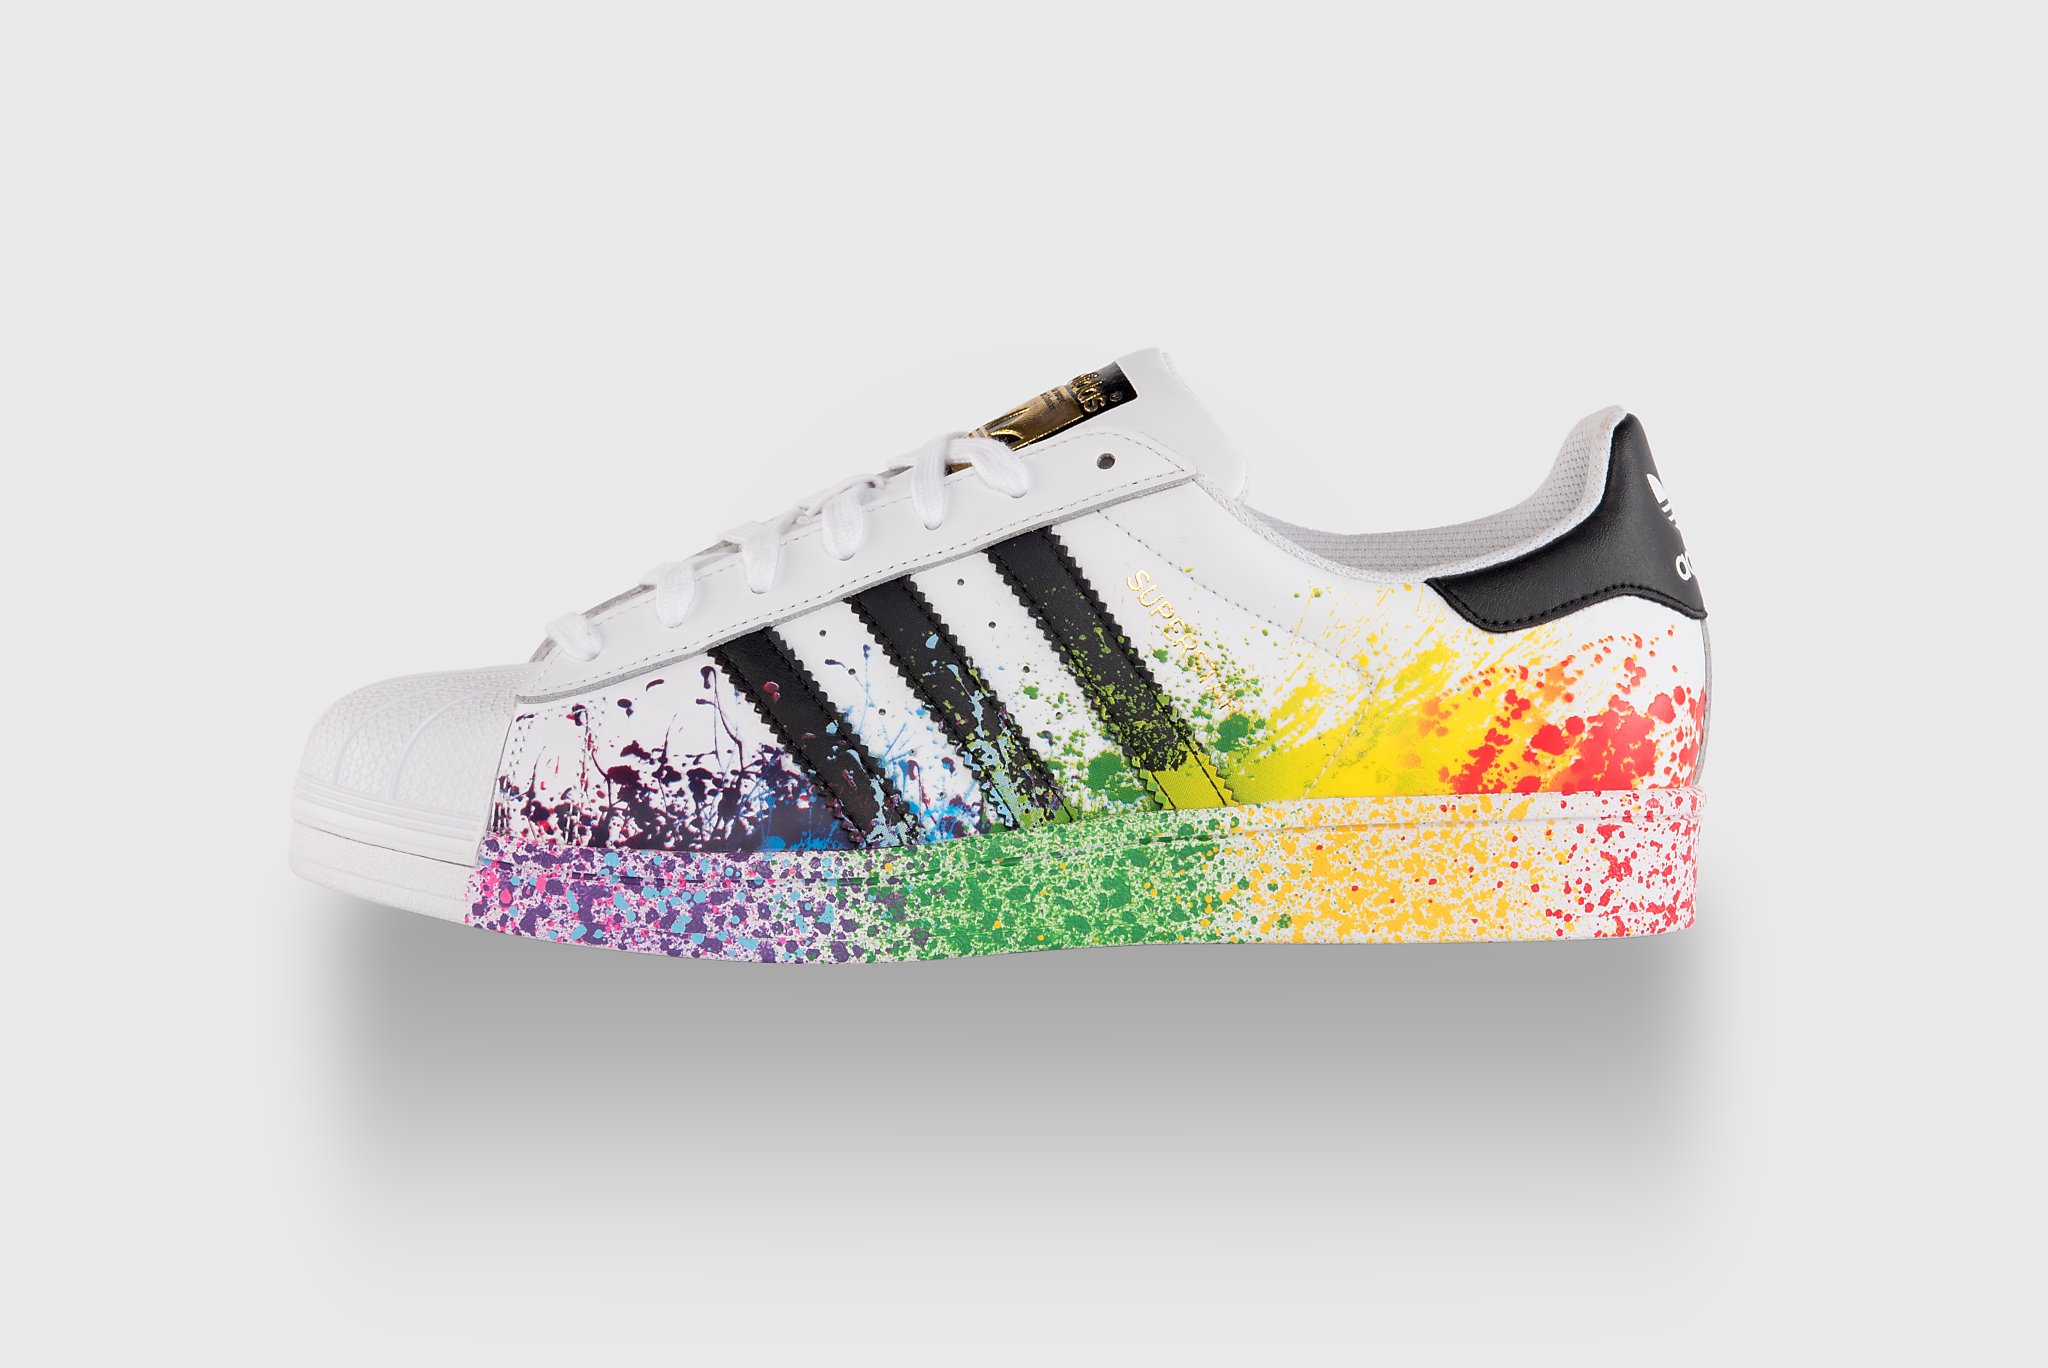 Reductor Verbinding Dusver Adidas goes over the rainbow for Gay Pride